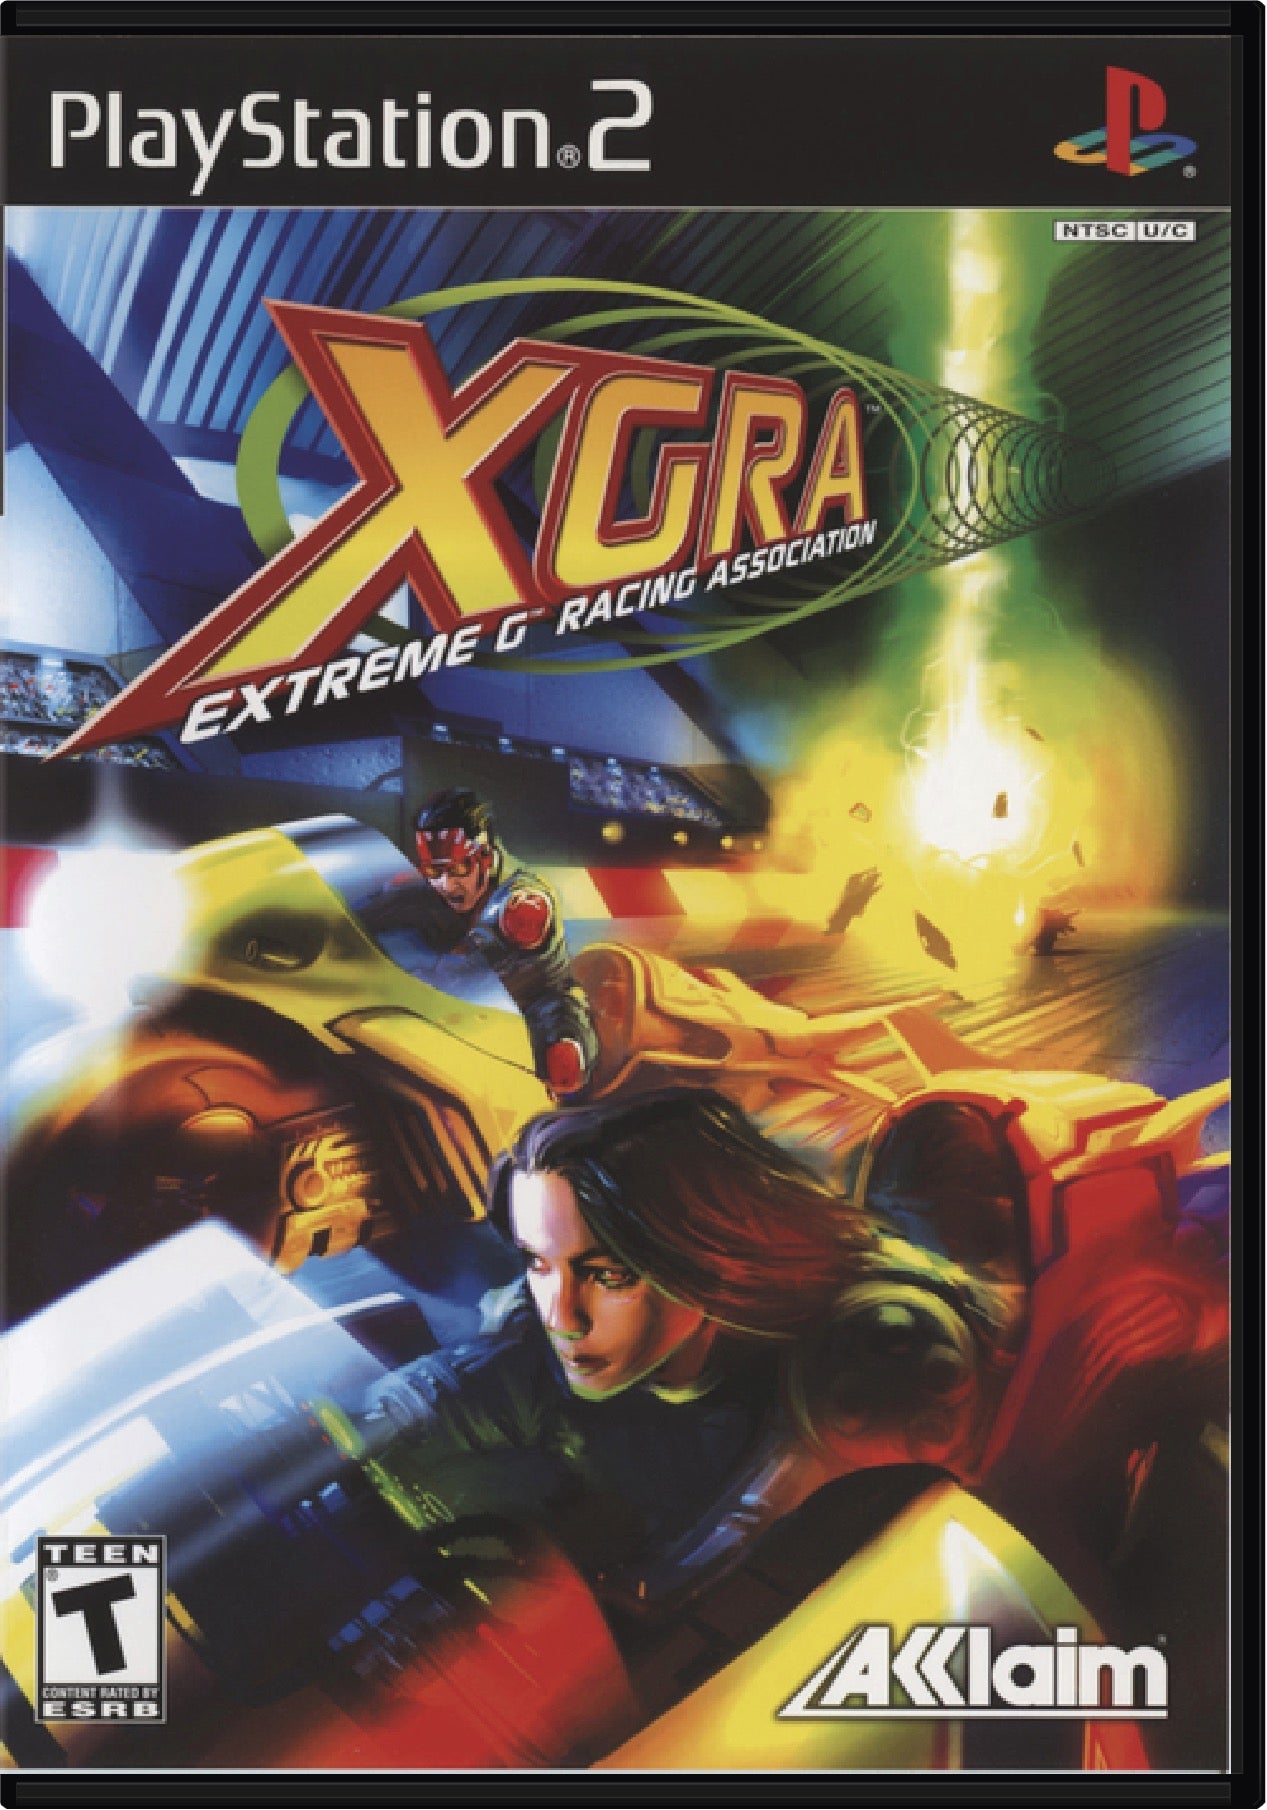 XGRA Cover Art and Product Photo